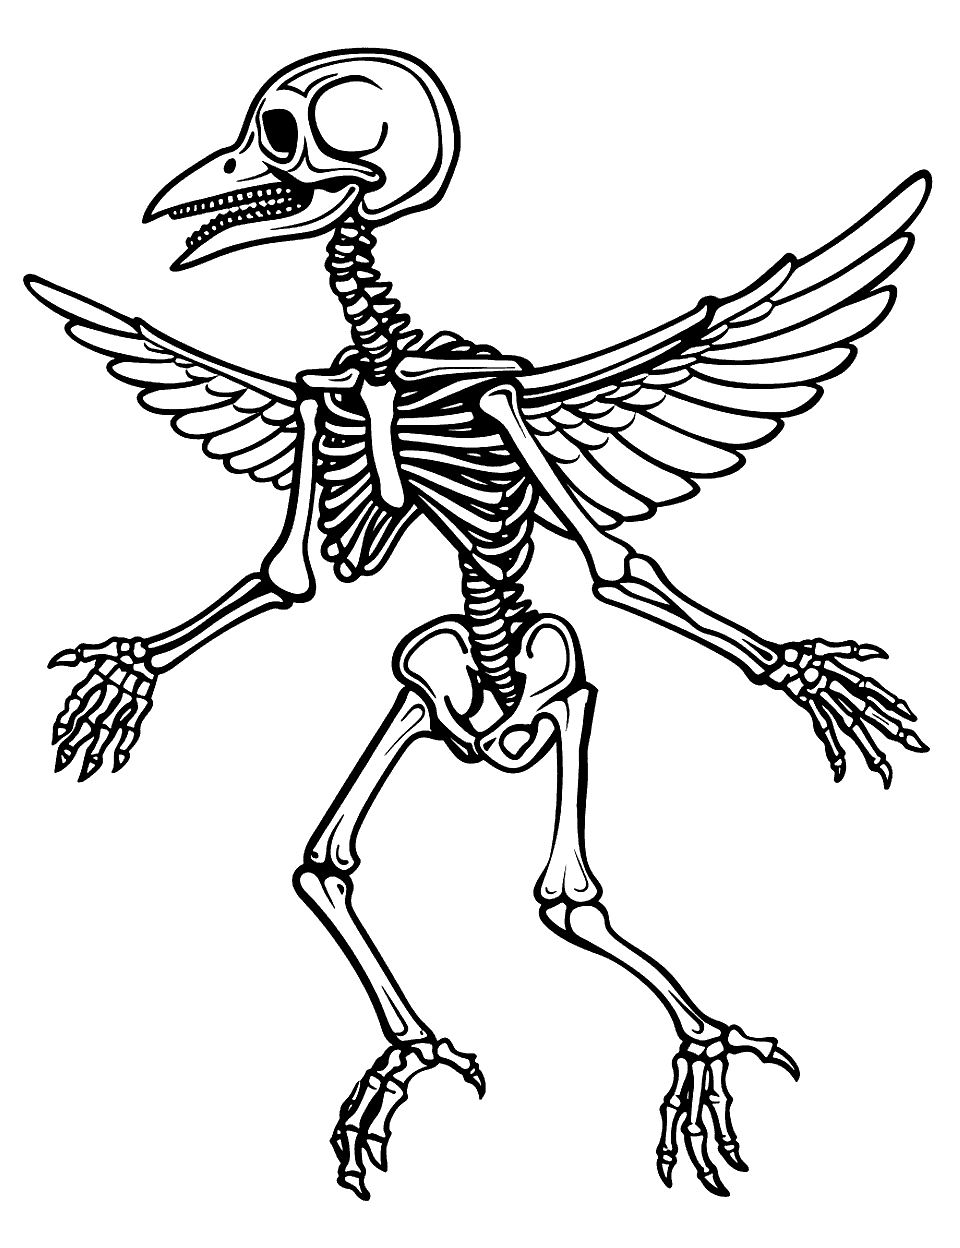 Simple Bird Skeleton Coloring Page - A simple, clean illustration of a bird skeleton in flight.